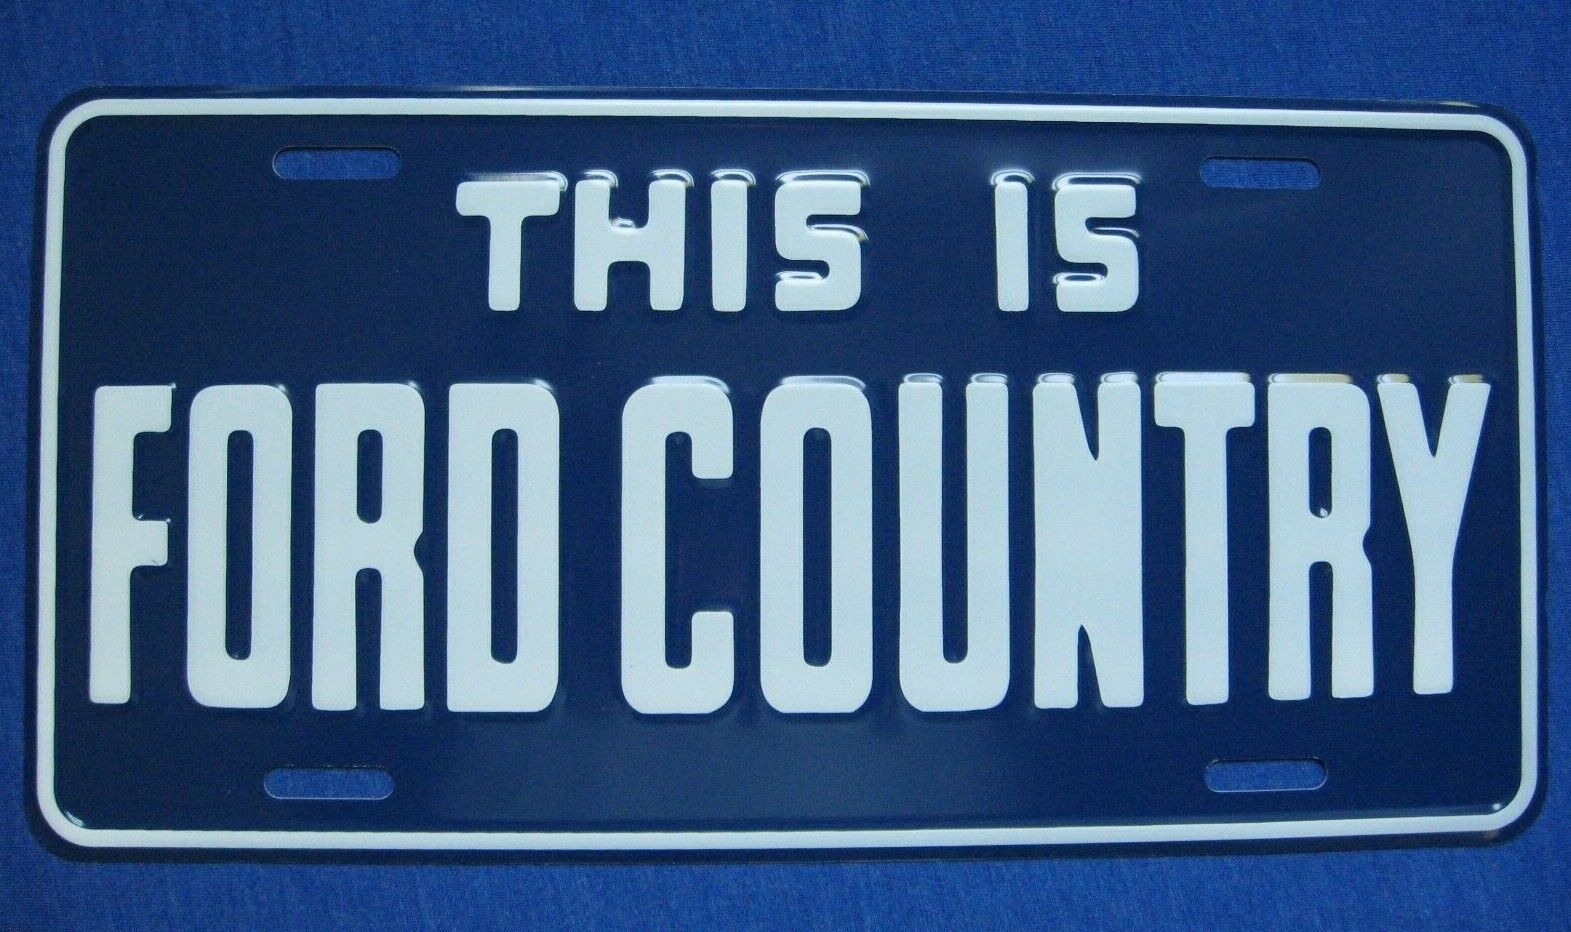 THIS IS FORD COUNTRY - dealership vanity booster license plate tag - BRAND NEW 